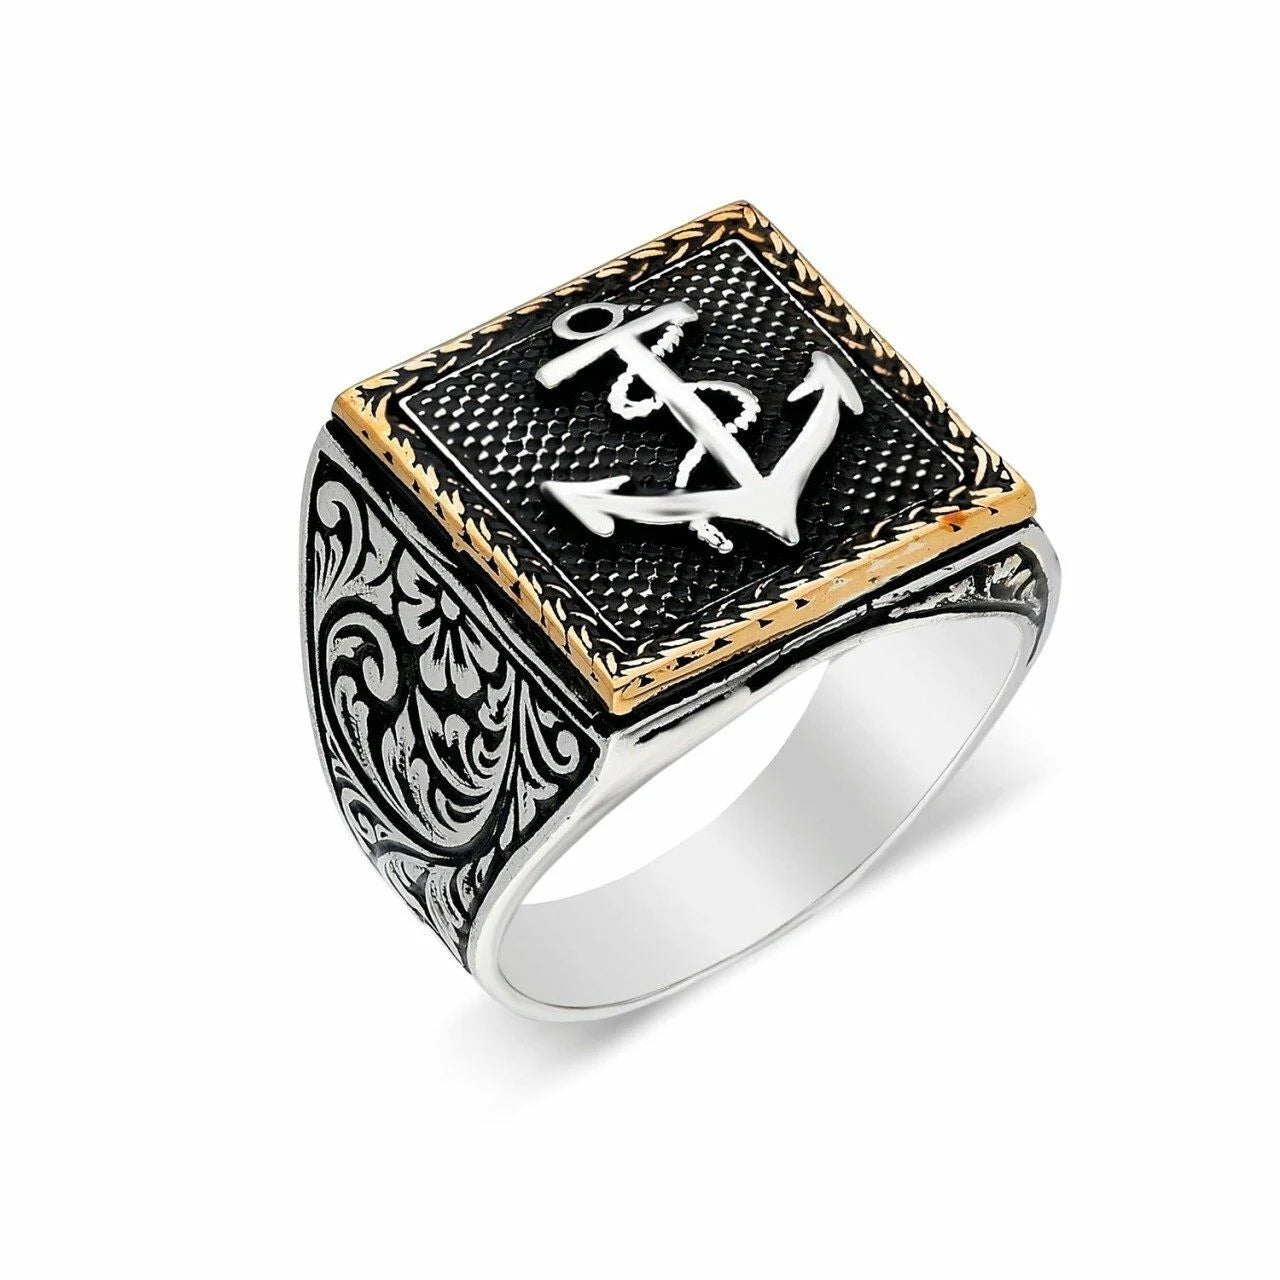 Anchor Ring - OrlaSilver Square | Engraved with Sides 925 Maritime Silver Design